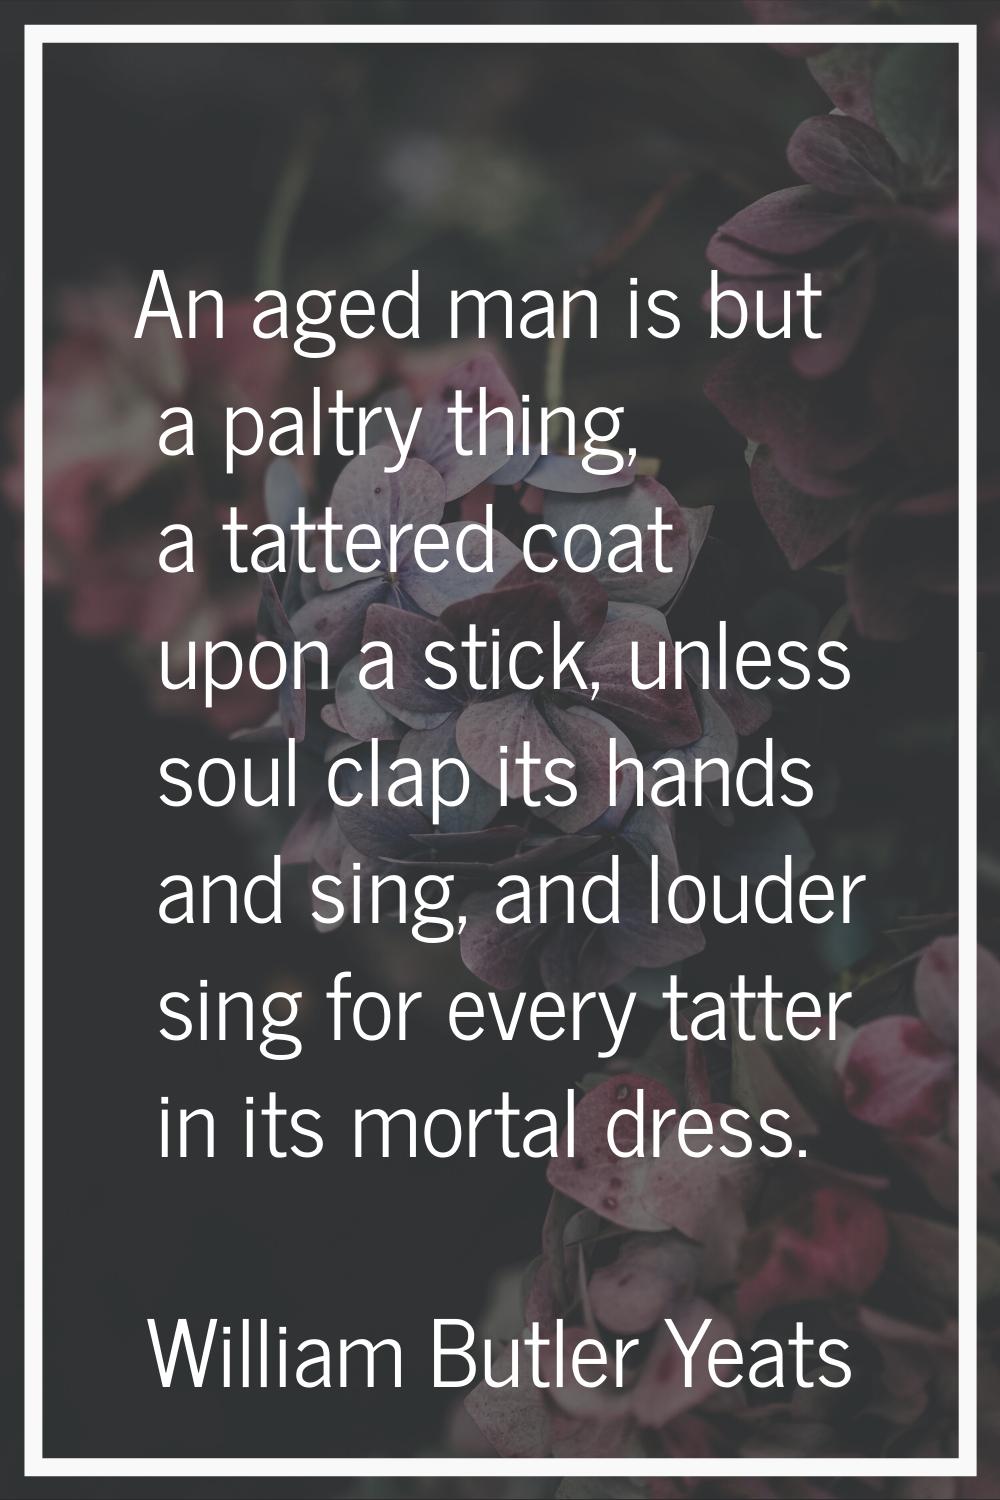 An aged man is but a paltry thing, a tattered coat upon a stick, unless soul clap its hands and sin